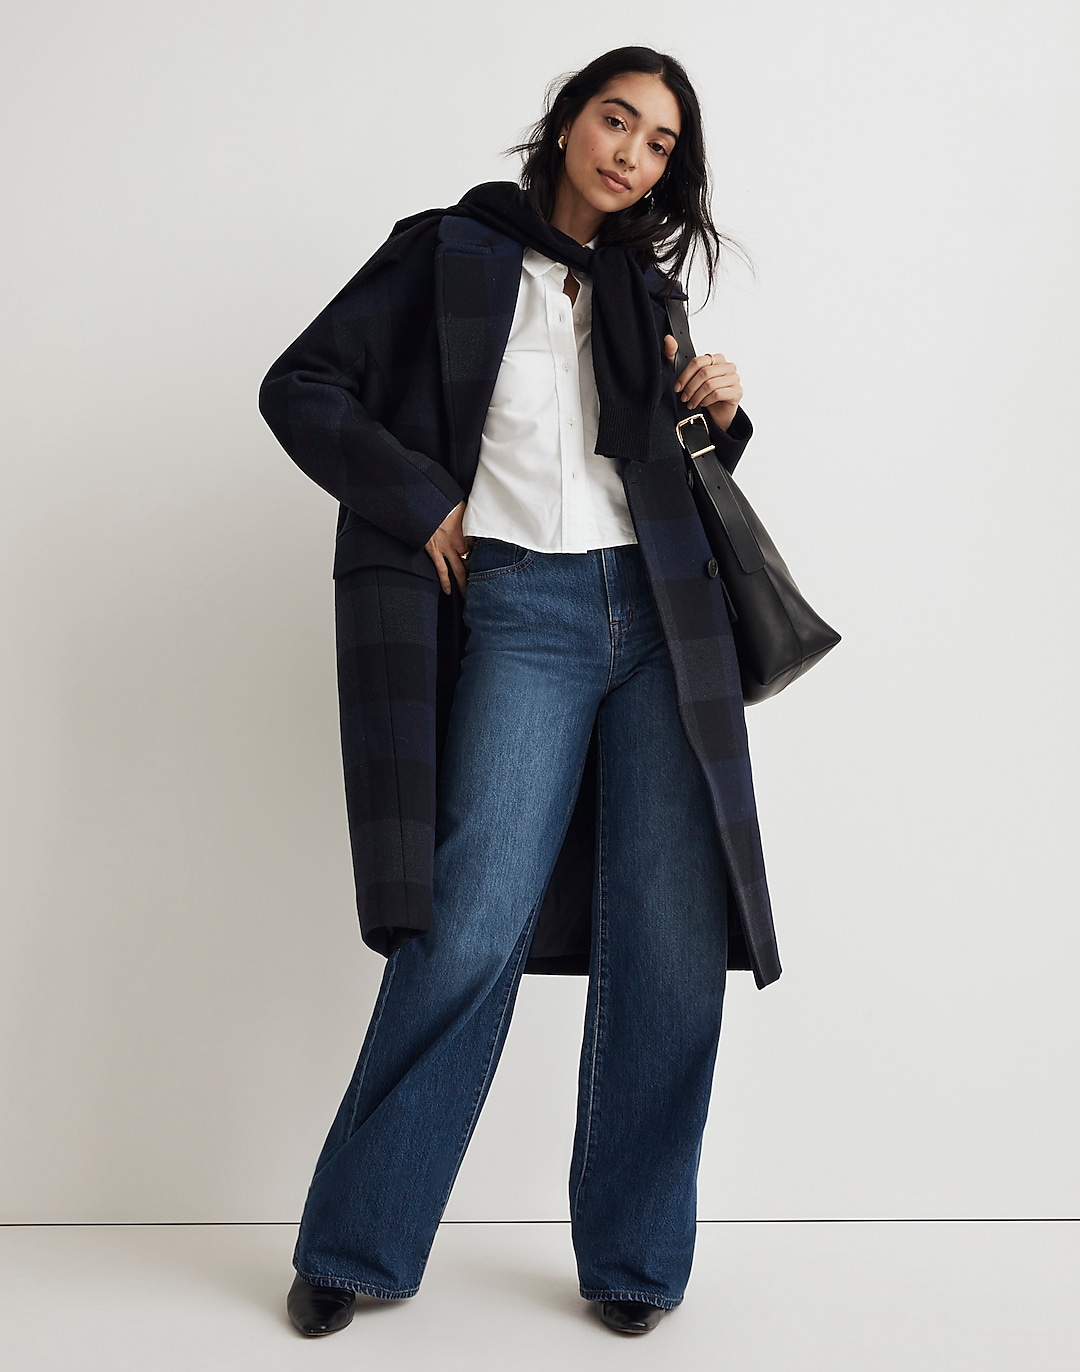 Superwide-Leg Jeans in Vietor Wash | Madewell